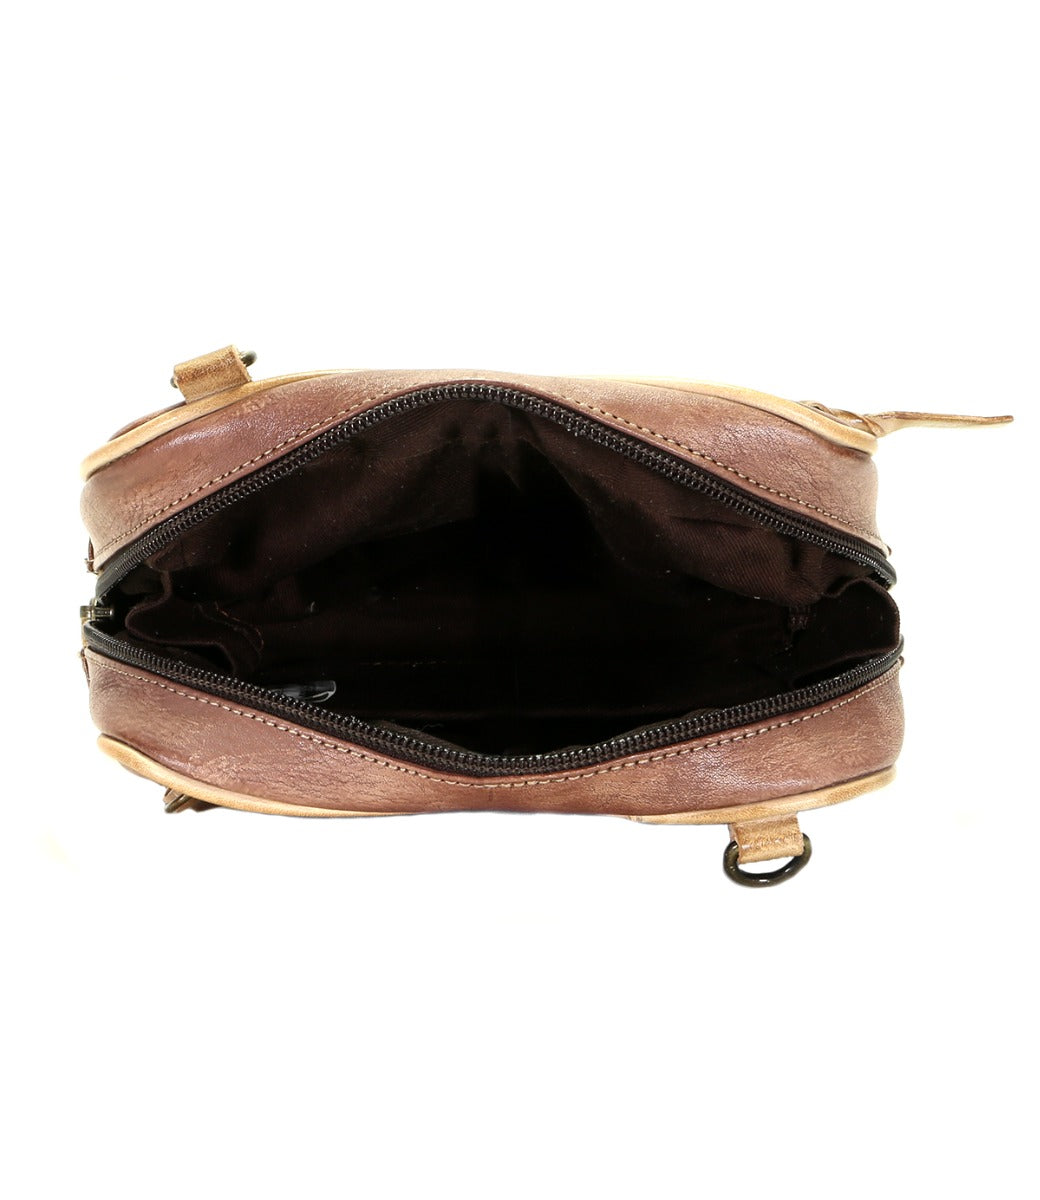 The inside of a Capture brown purse with a zipper from Bed Stu.